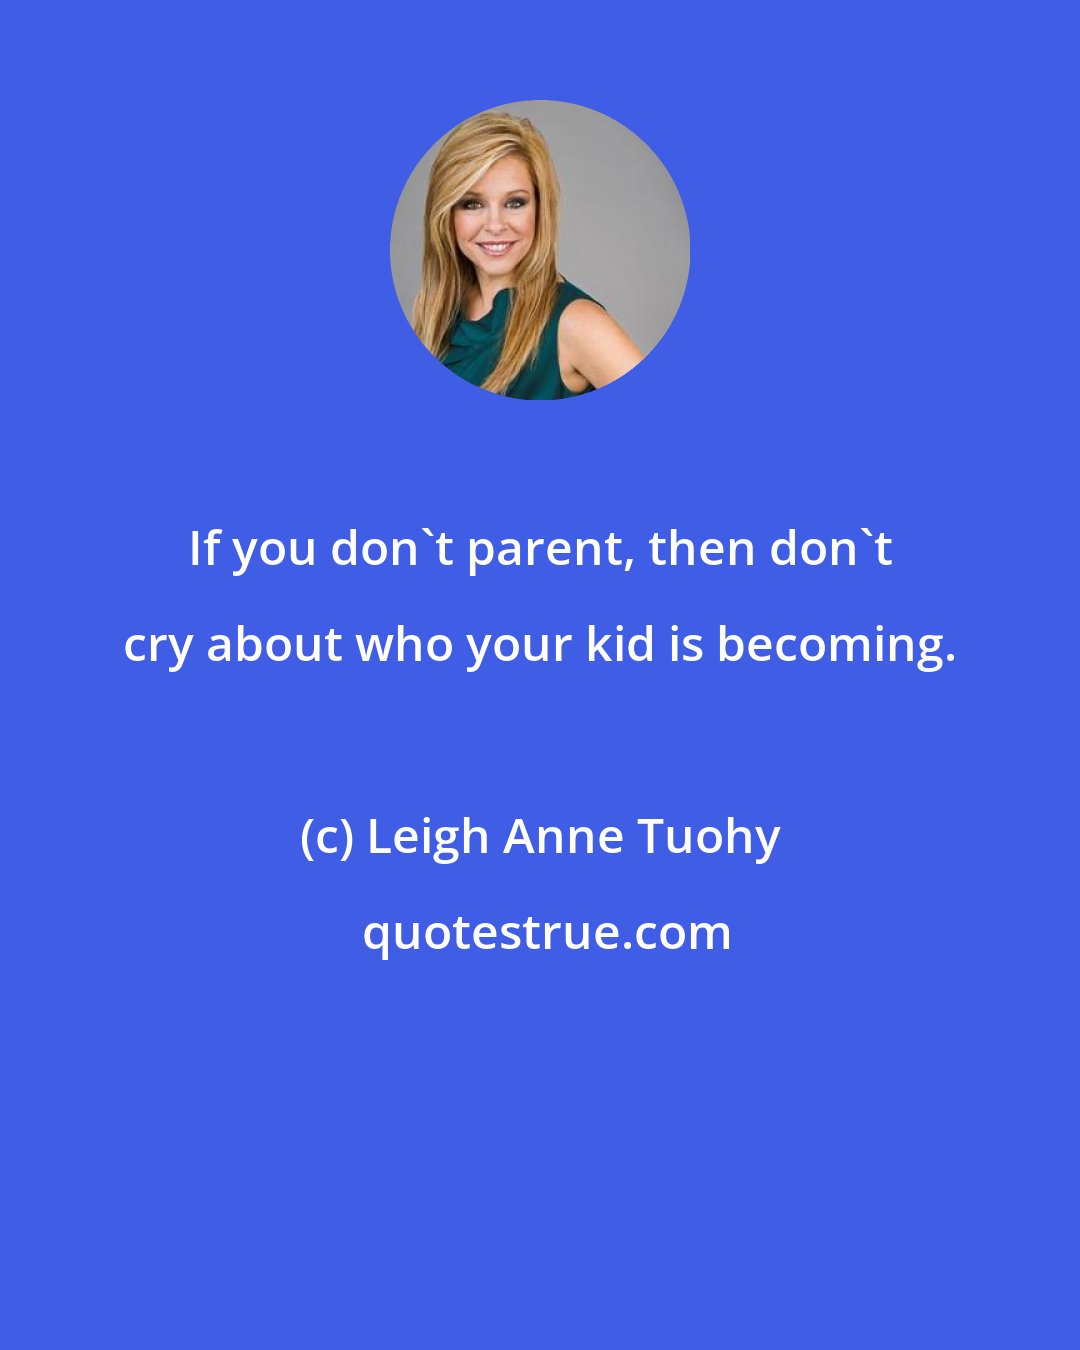 Leigh Anne Tuohy: If you don't parent, then don't cry about who your kid is becoming.